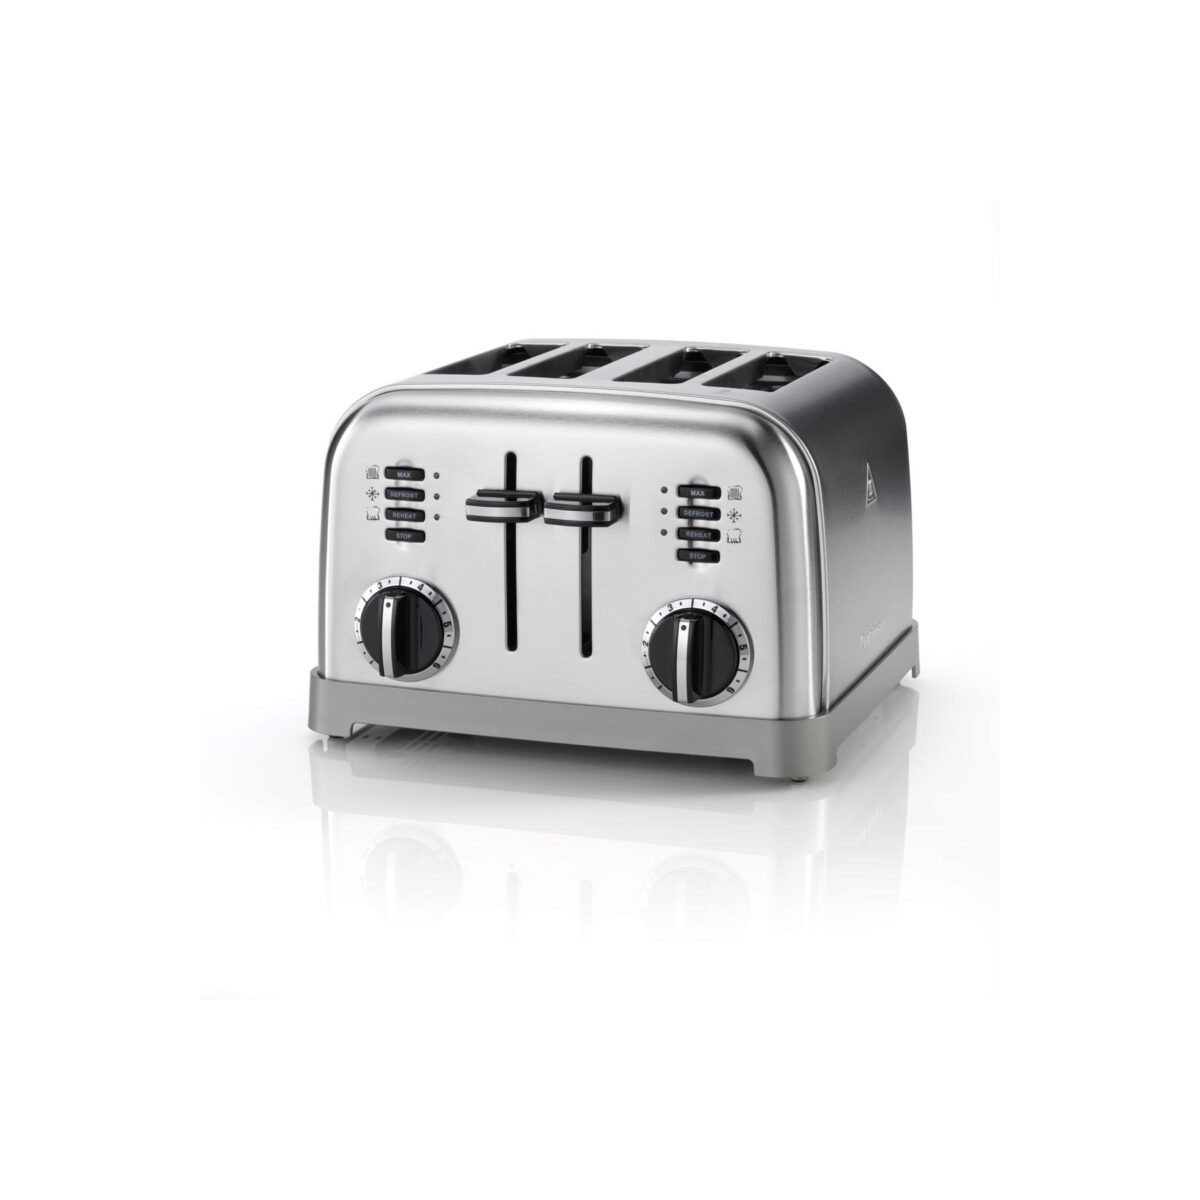 CUISINART TOASTER 4 TRANCHES